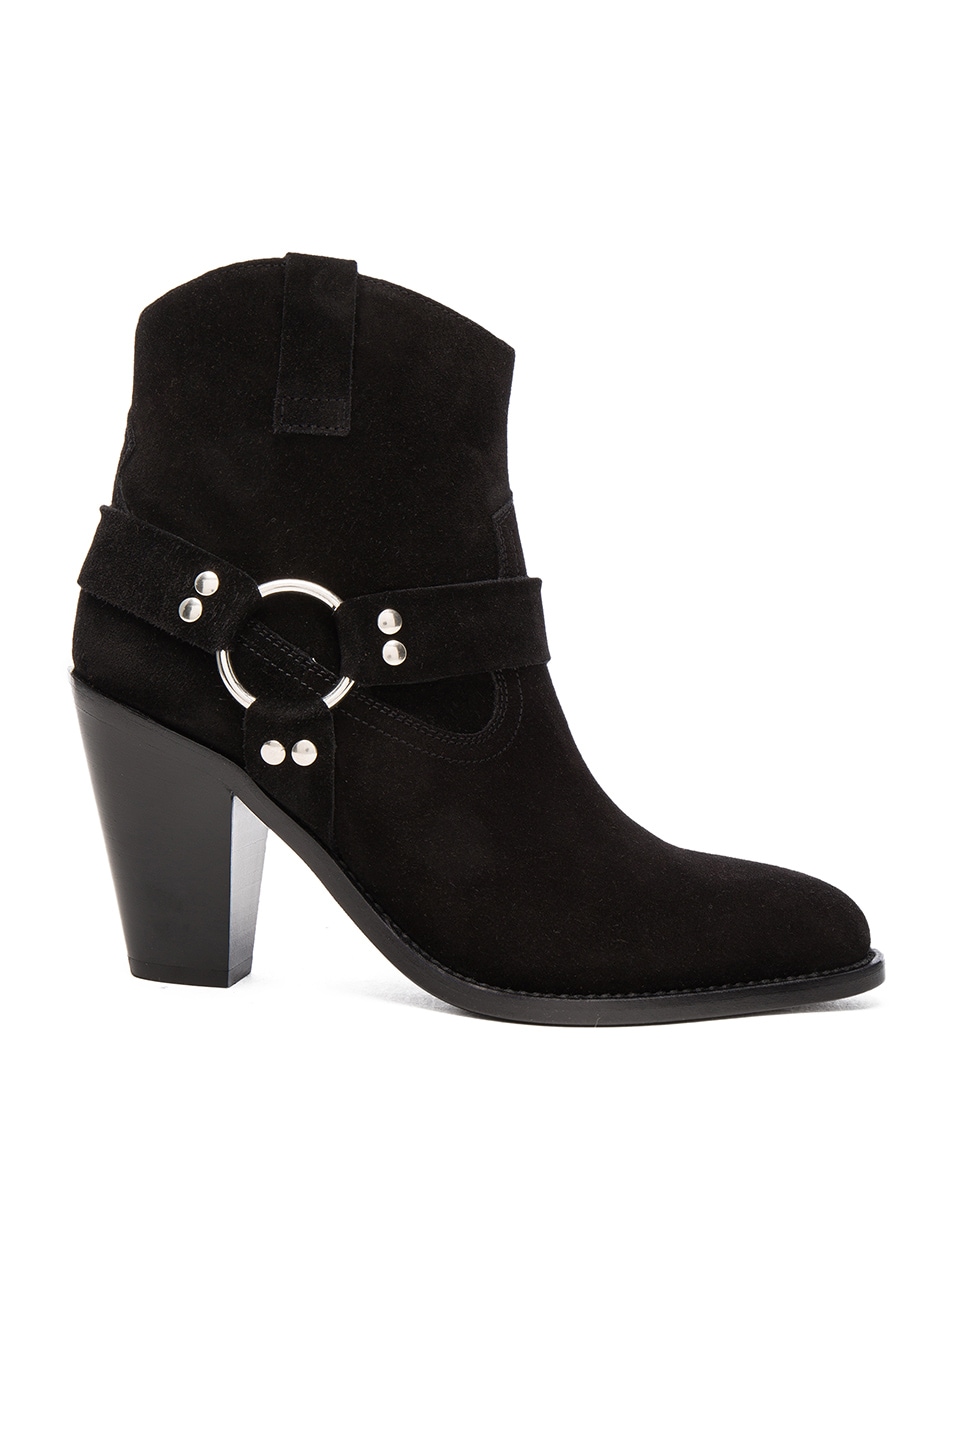 Image 1 of Saint Laurent Suede Curtis Harness Boots in Black